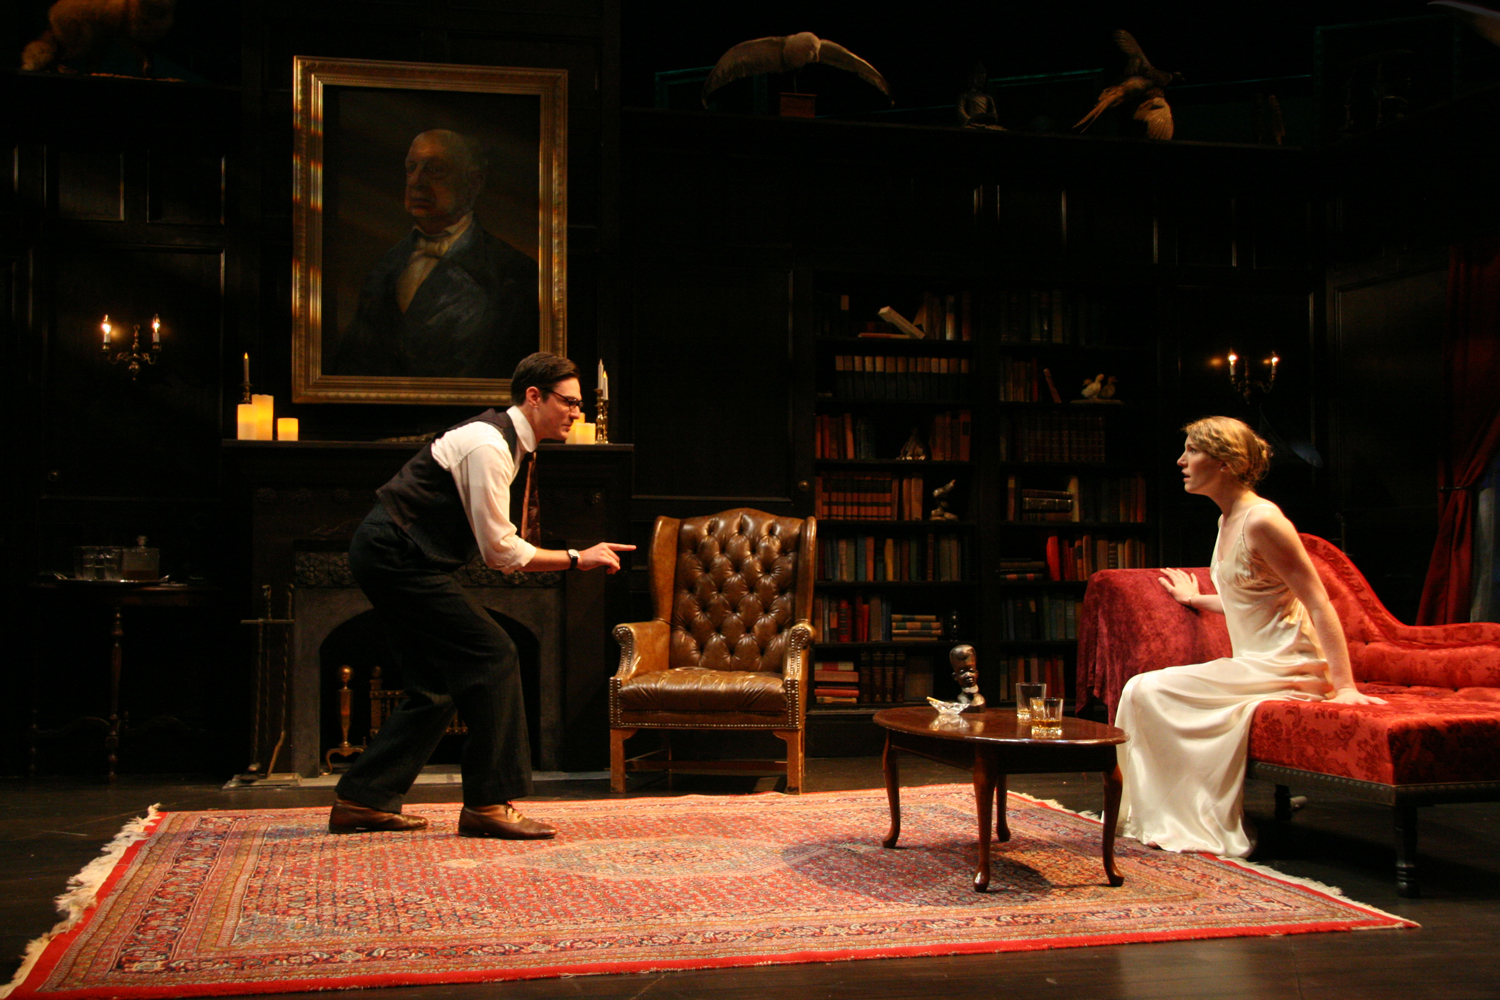 ACT III, BACK IN THE LIBRARY